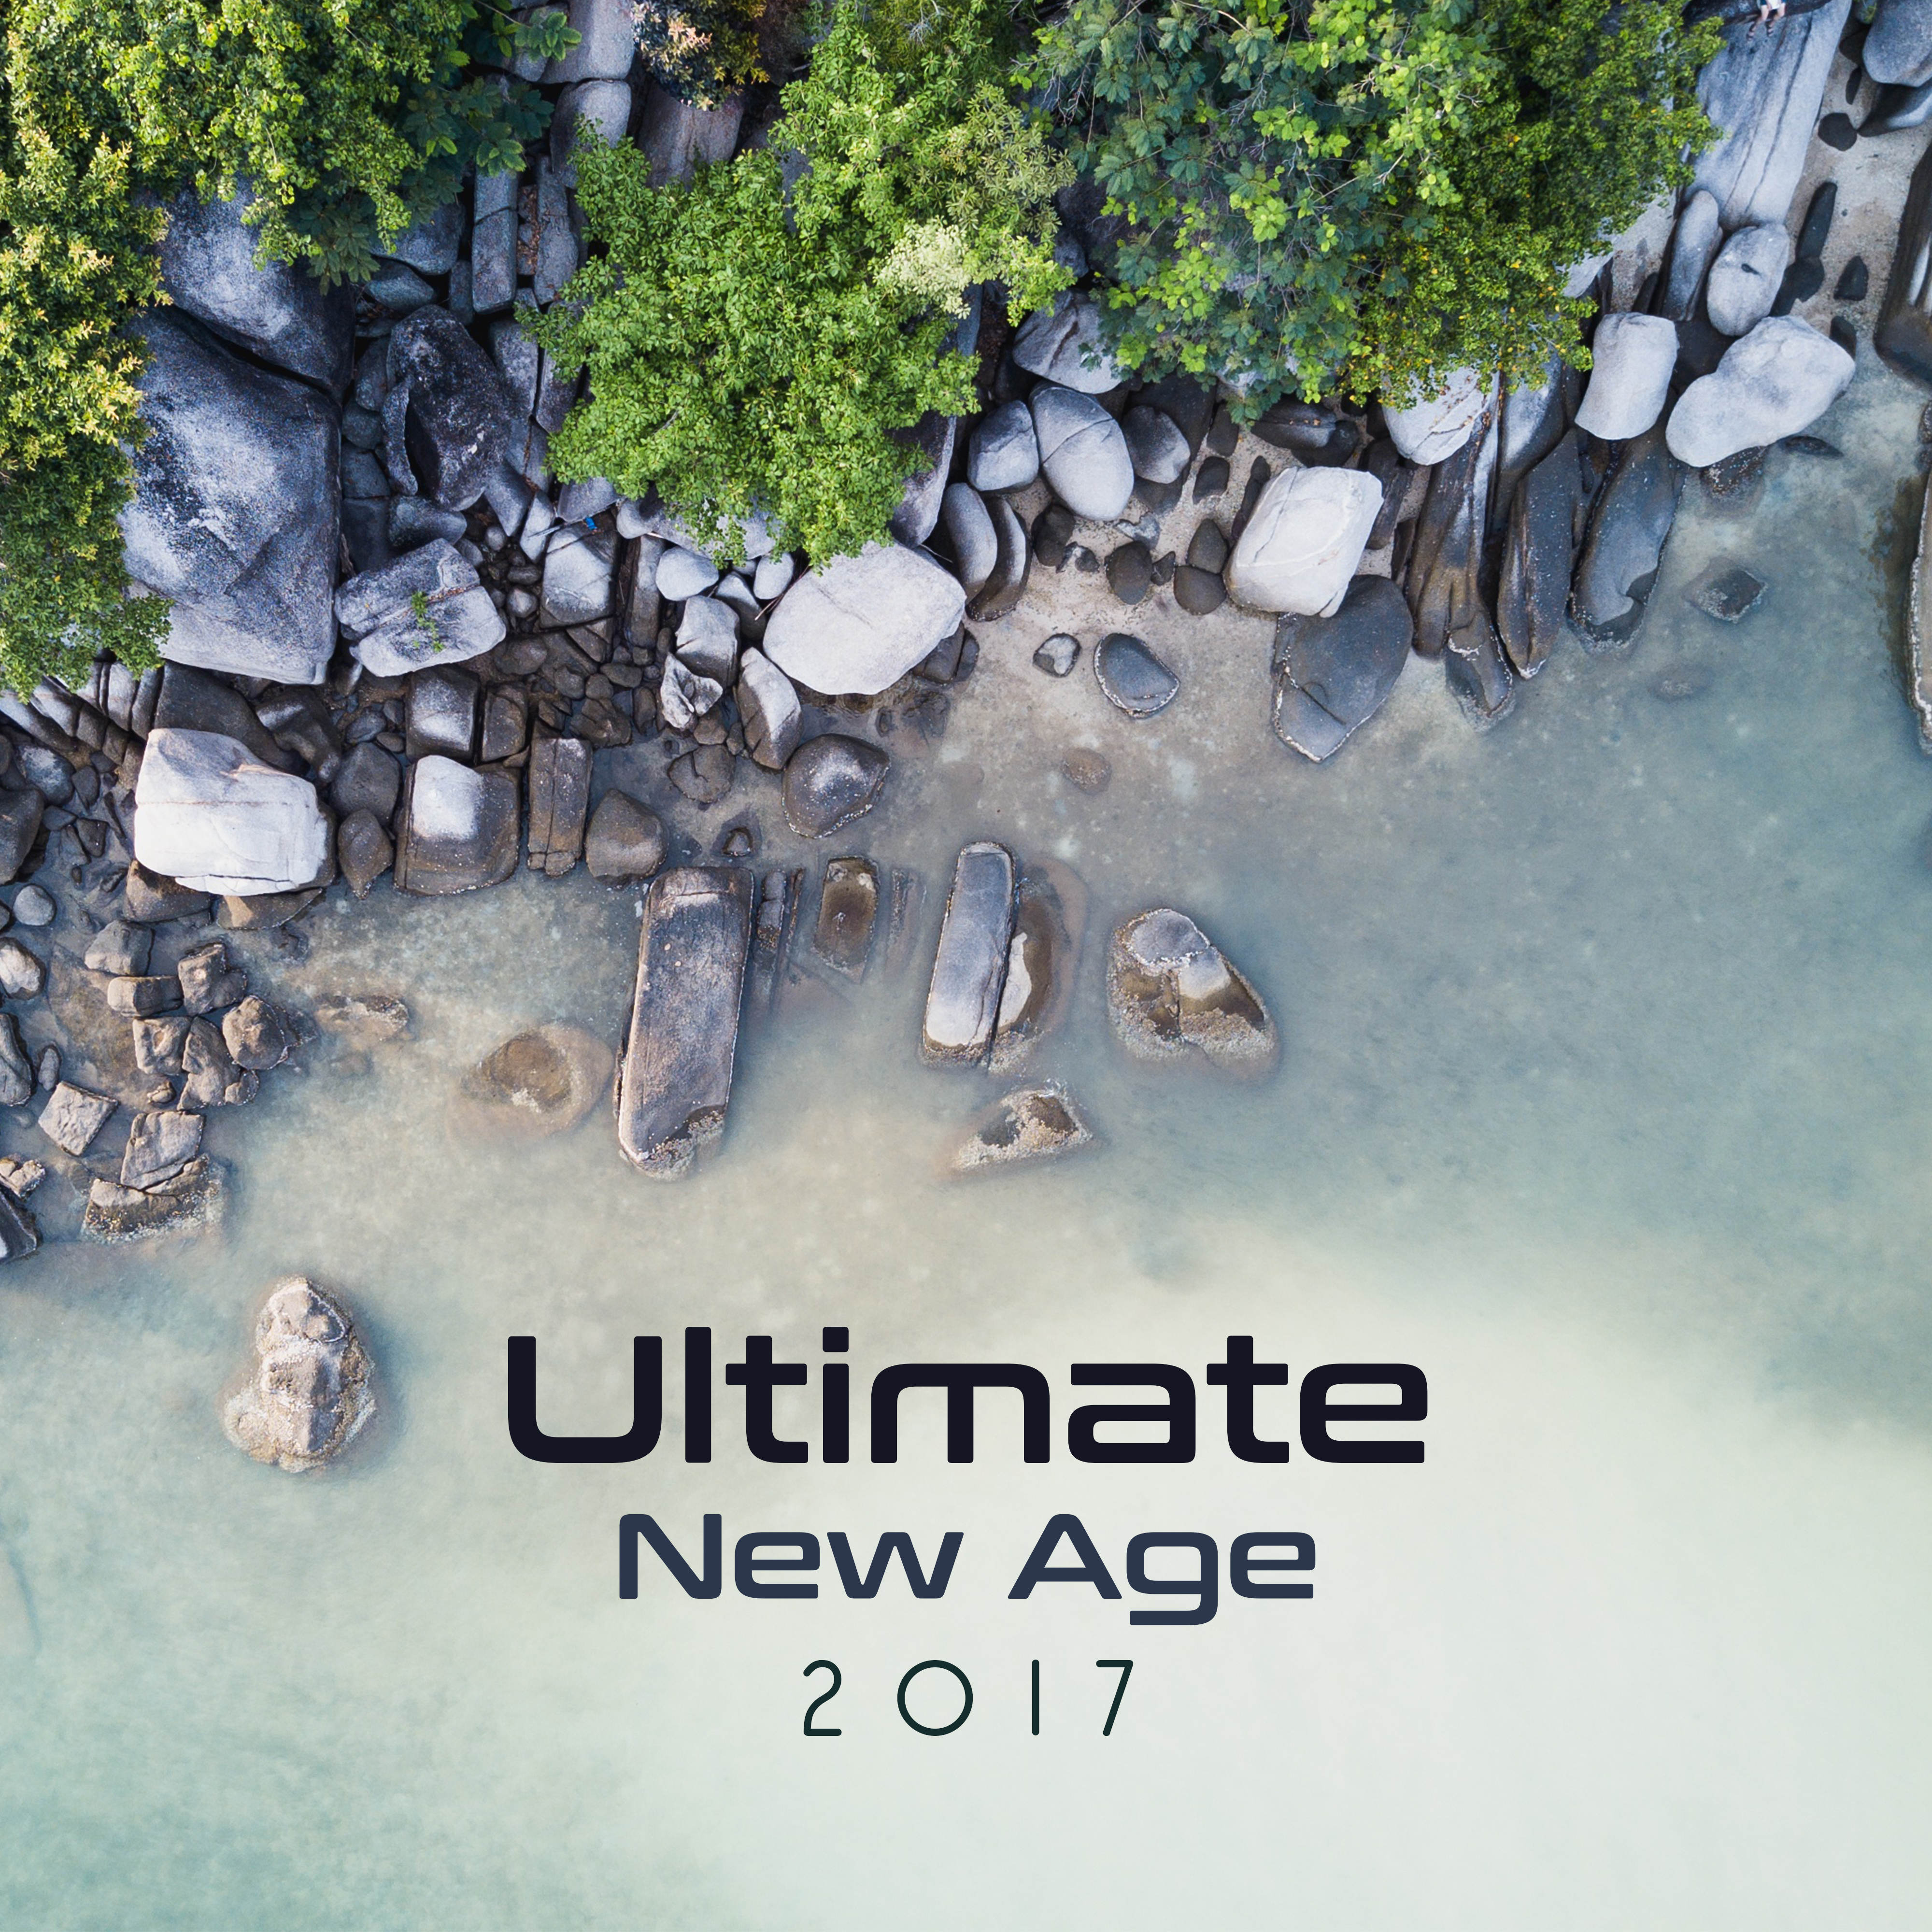 Ultimate New Age 2017 – Relaxing Music, Sounds of Nature, Meditation, Zen, Bliss